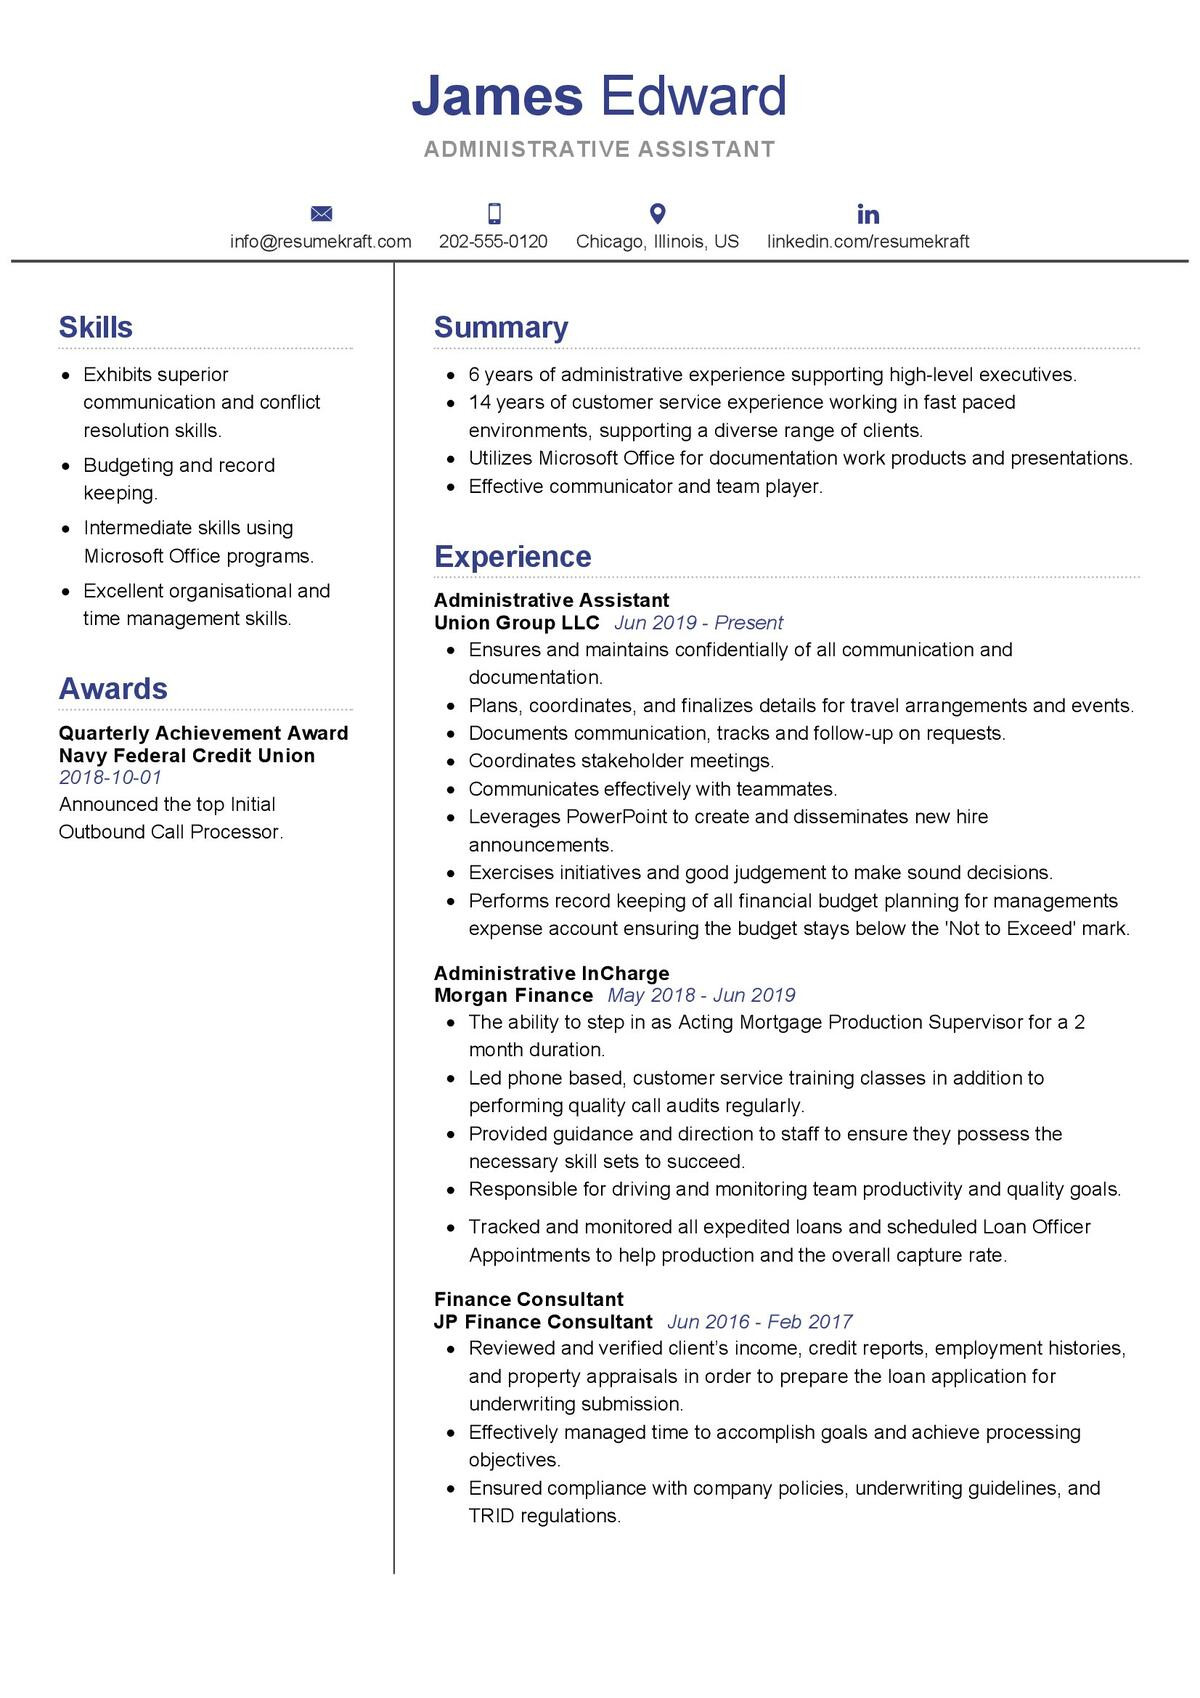 Good Resume Sample for Administrative Specialist Position Administrative assistant Resume Sample 2021 Writing Guide …